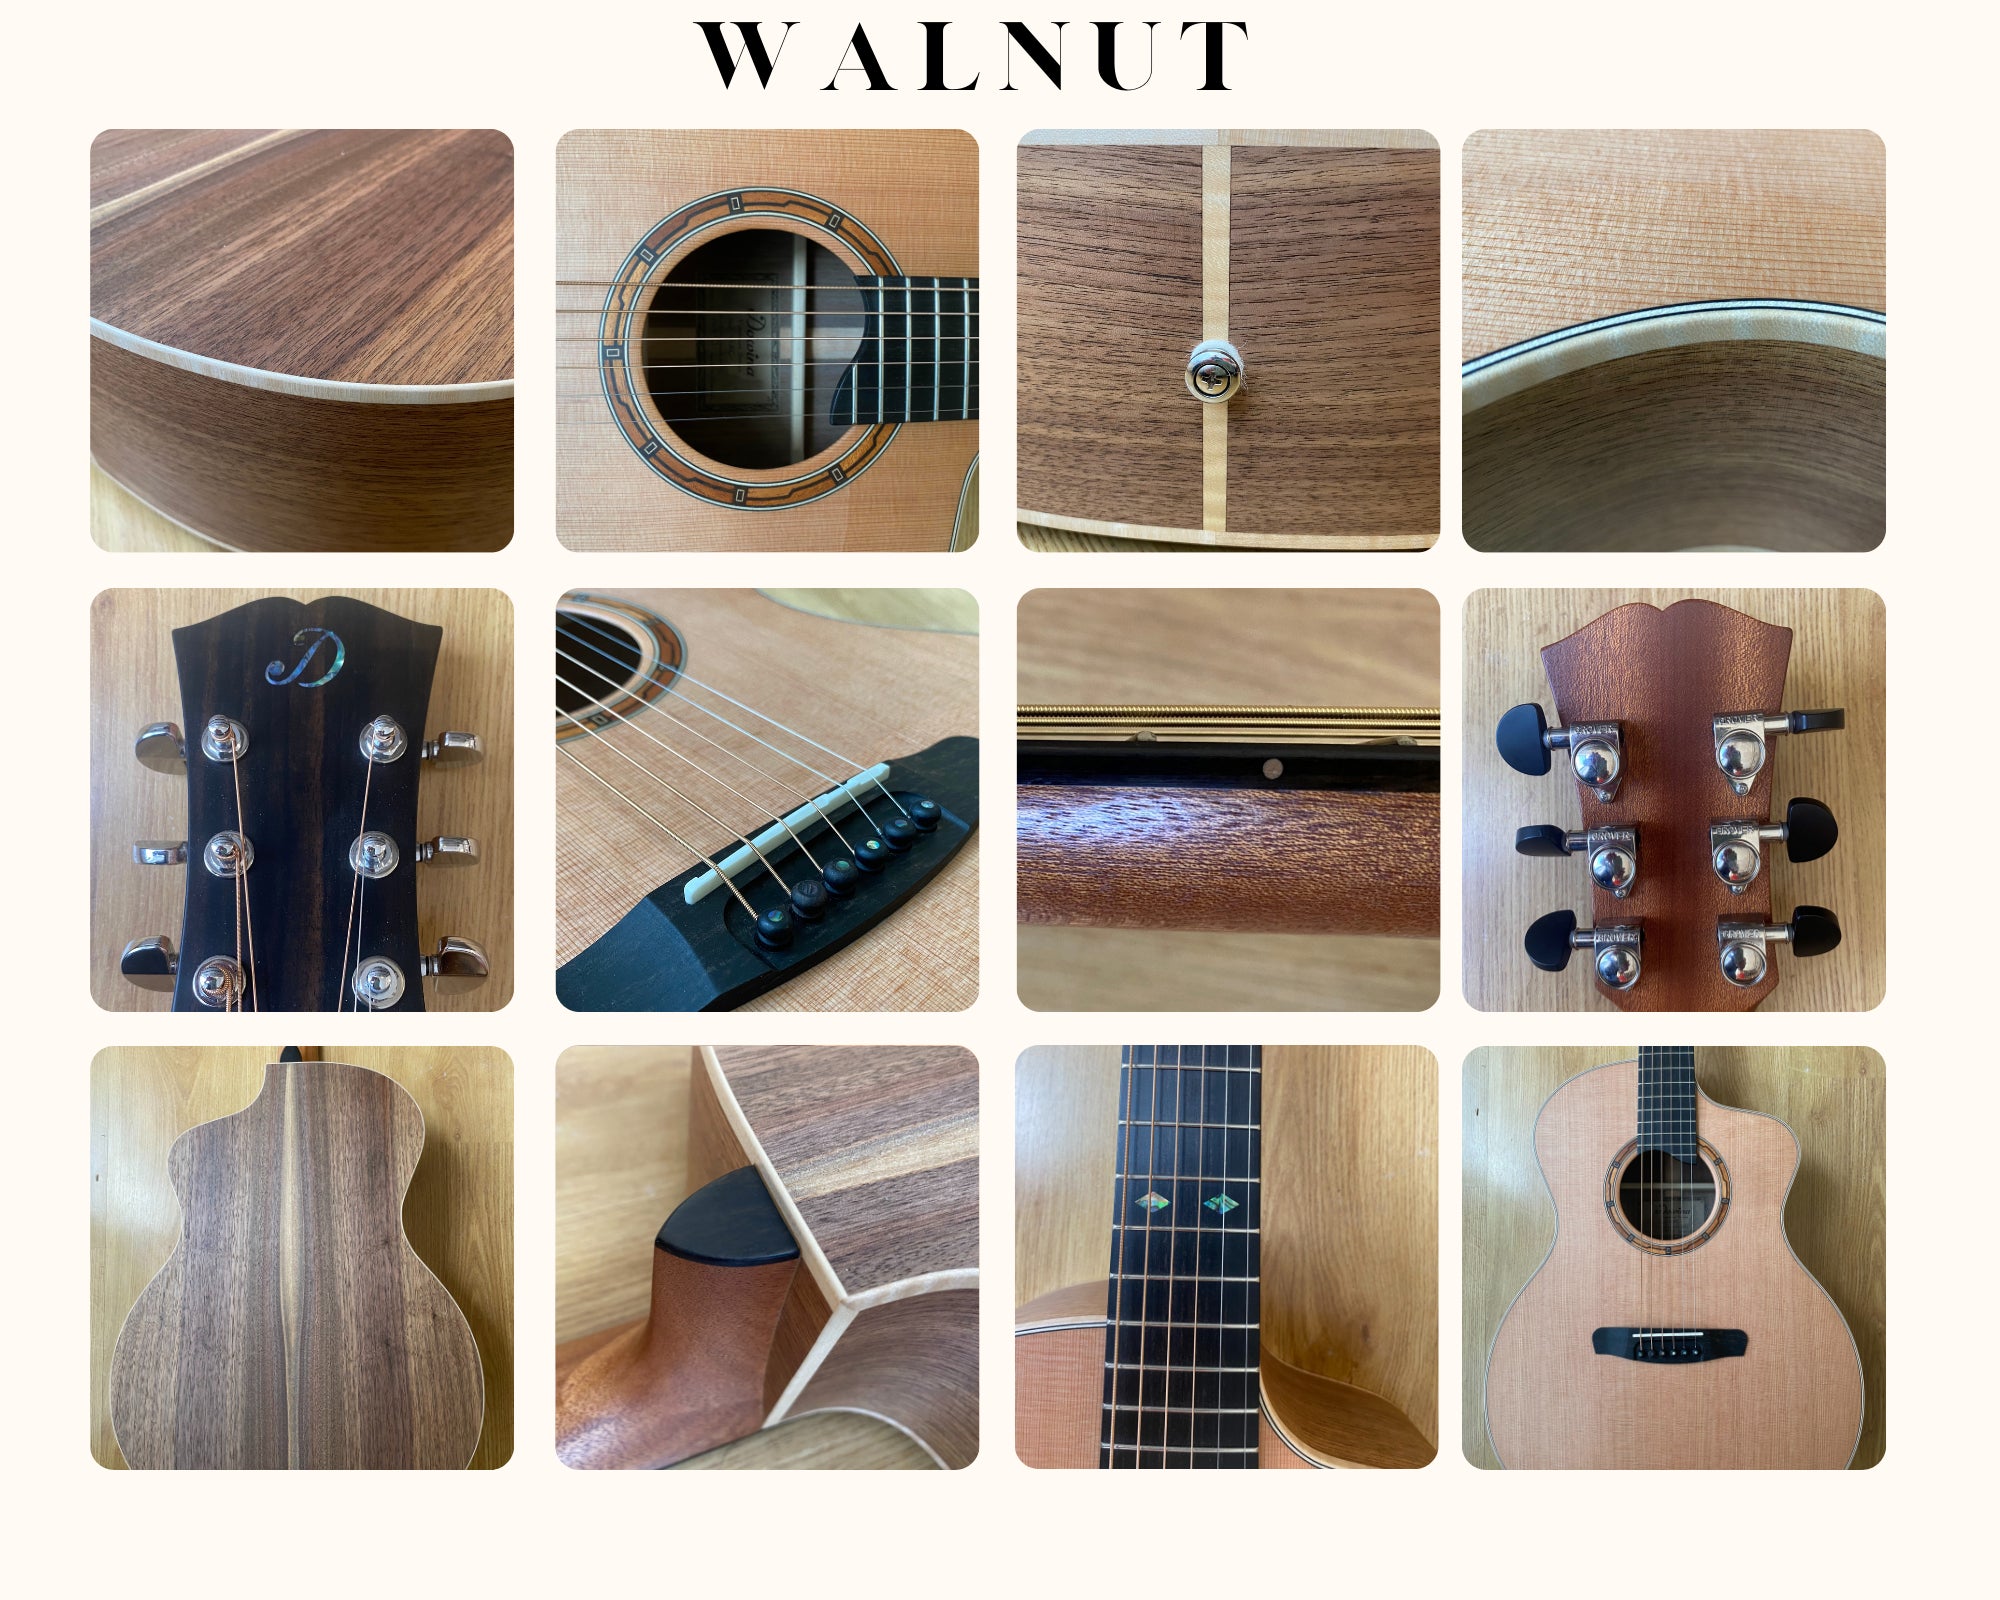 Dowina Custom Option: "Dowina Inspired" Mix and Match Inspiration Pallette Cosmetics, Acoustic Guitar for sale at Richards Guitars.